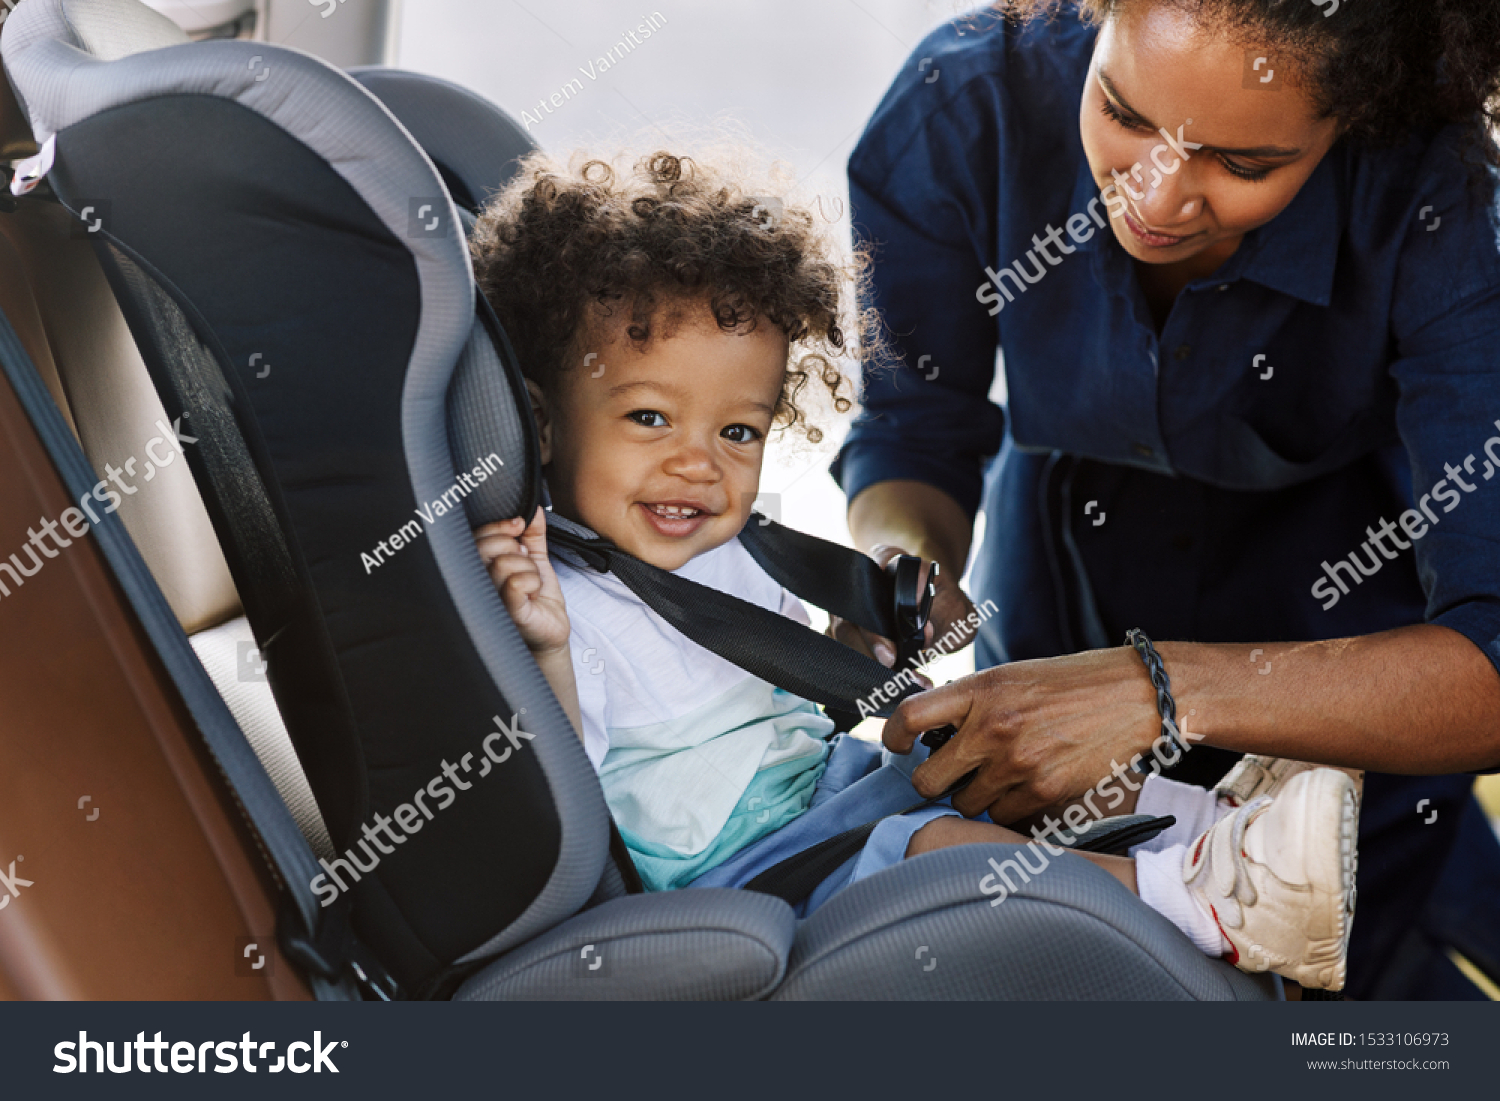 Side view of a happy little boy looking at camera while his mother buckling him in a car seat #1533106973